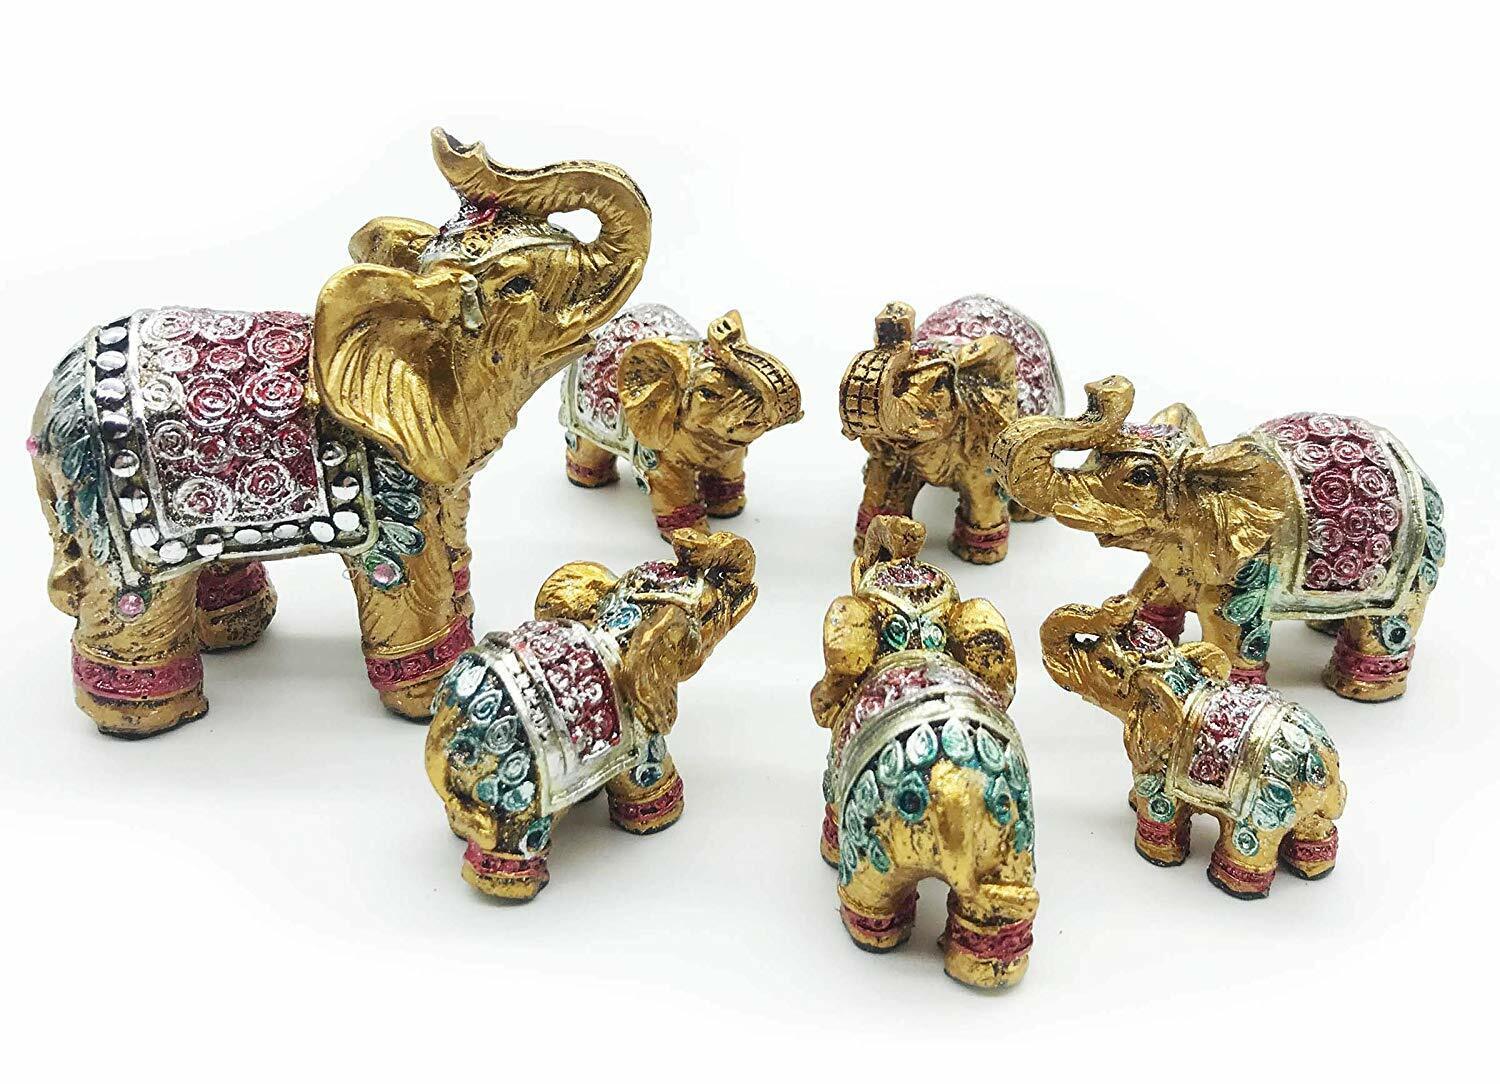 Set of 7 pcs Vintage Golden Indian Elephant Family Statues Wealth Lucky Figurine